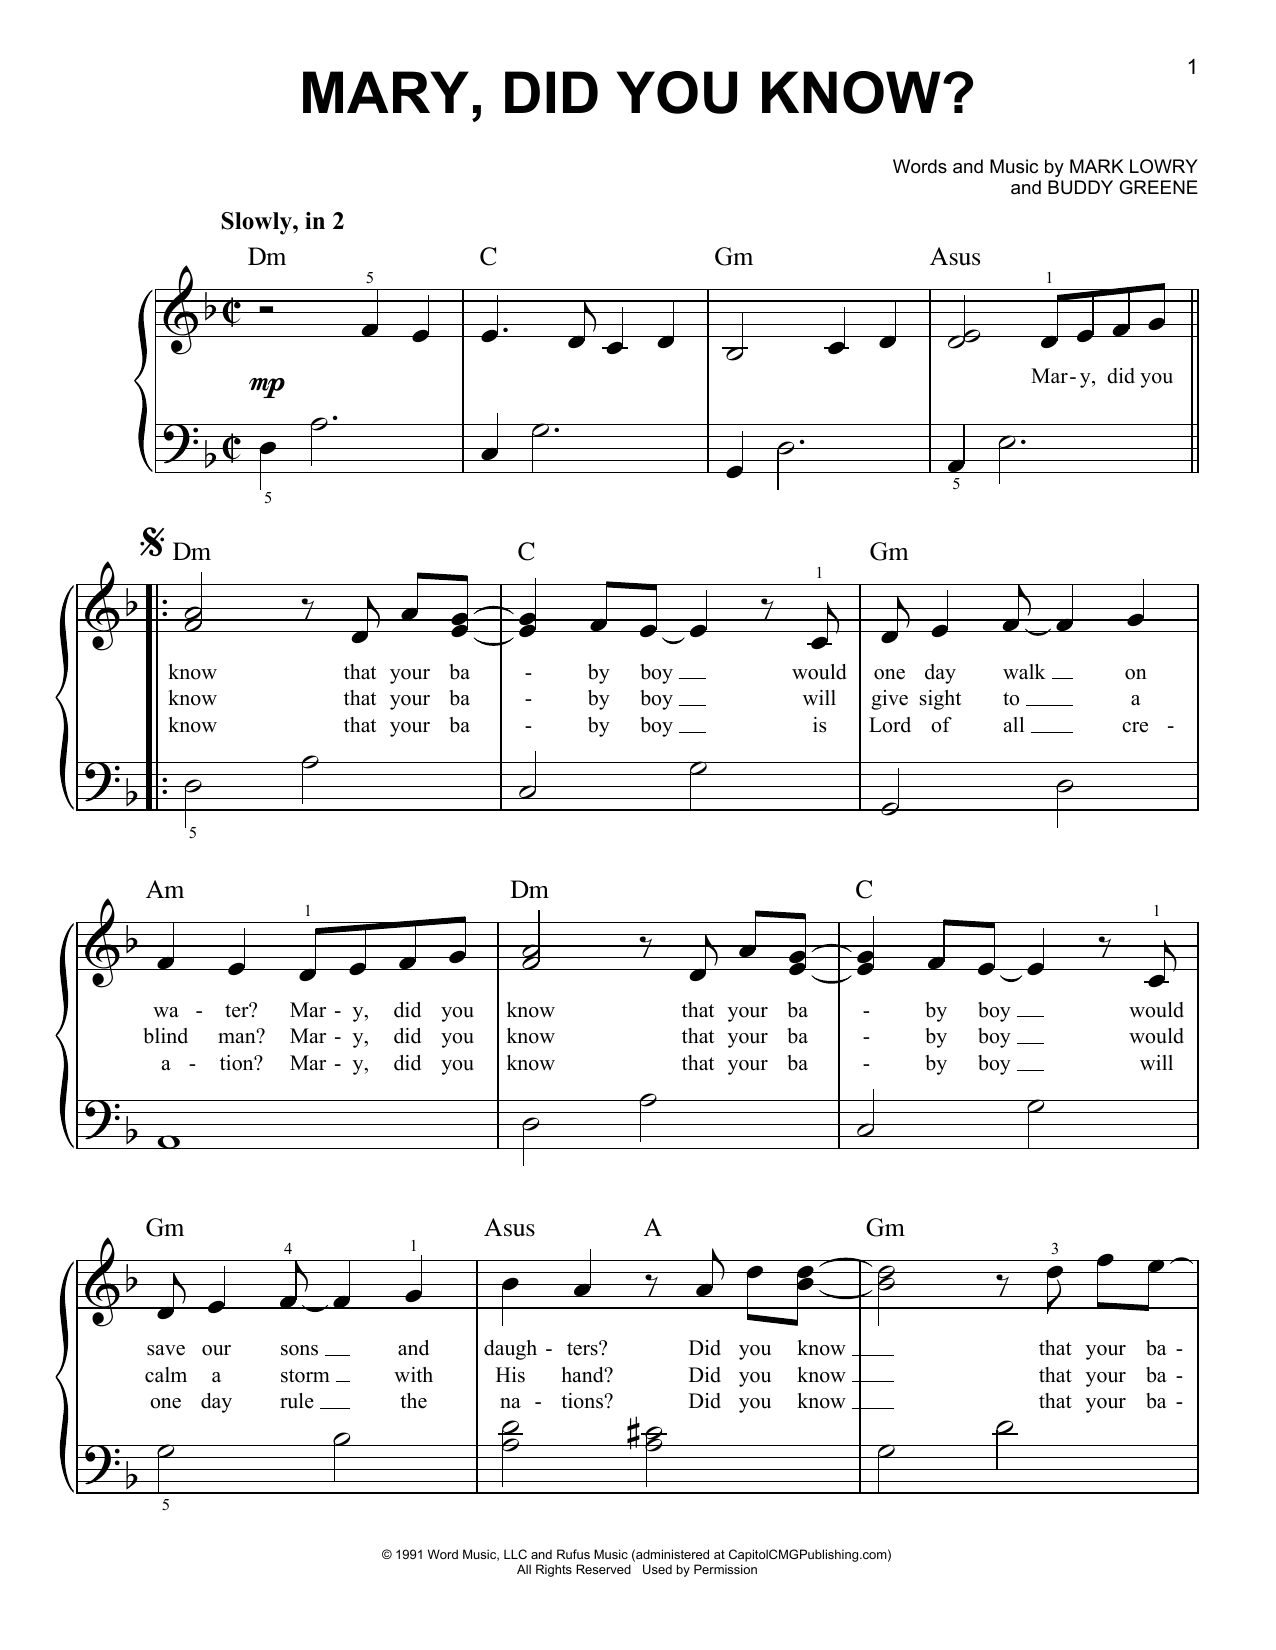 Mary Did You Know Chords Sheet Music Digital Files To Print Licensed Kathy Mattea Digital